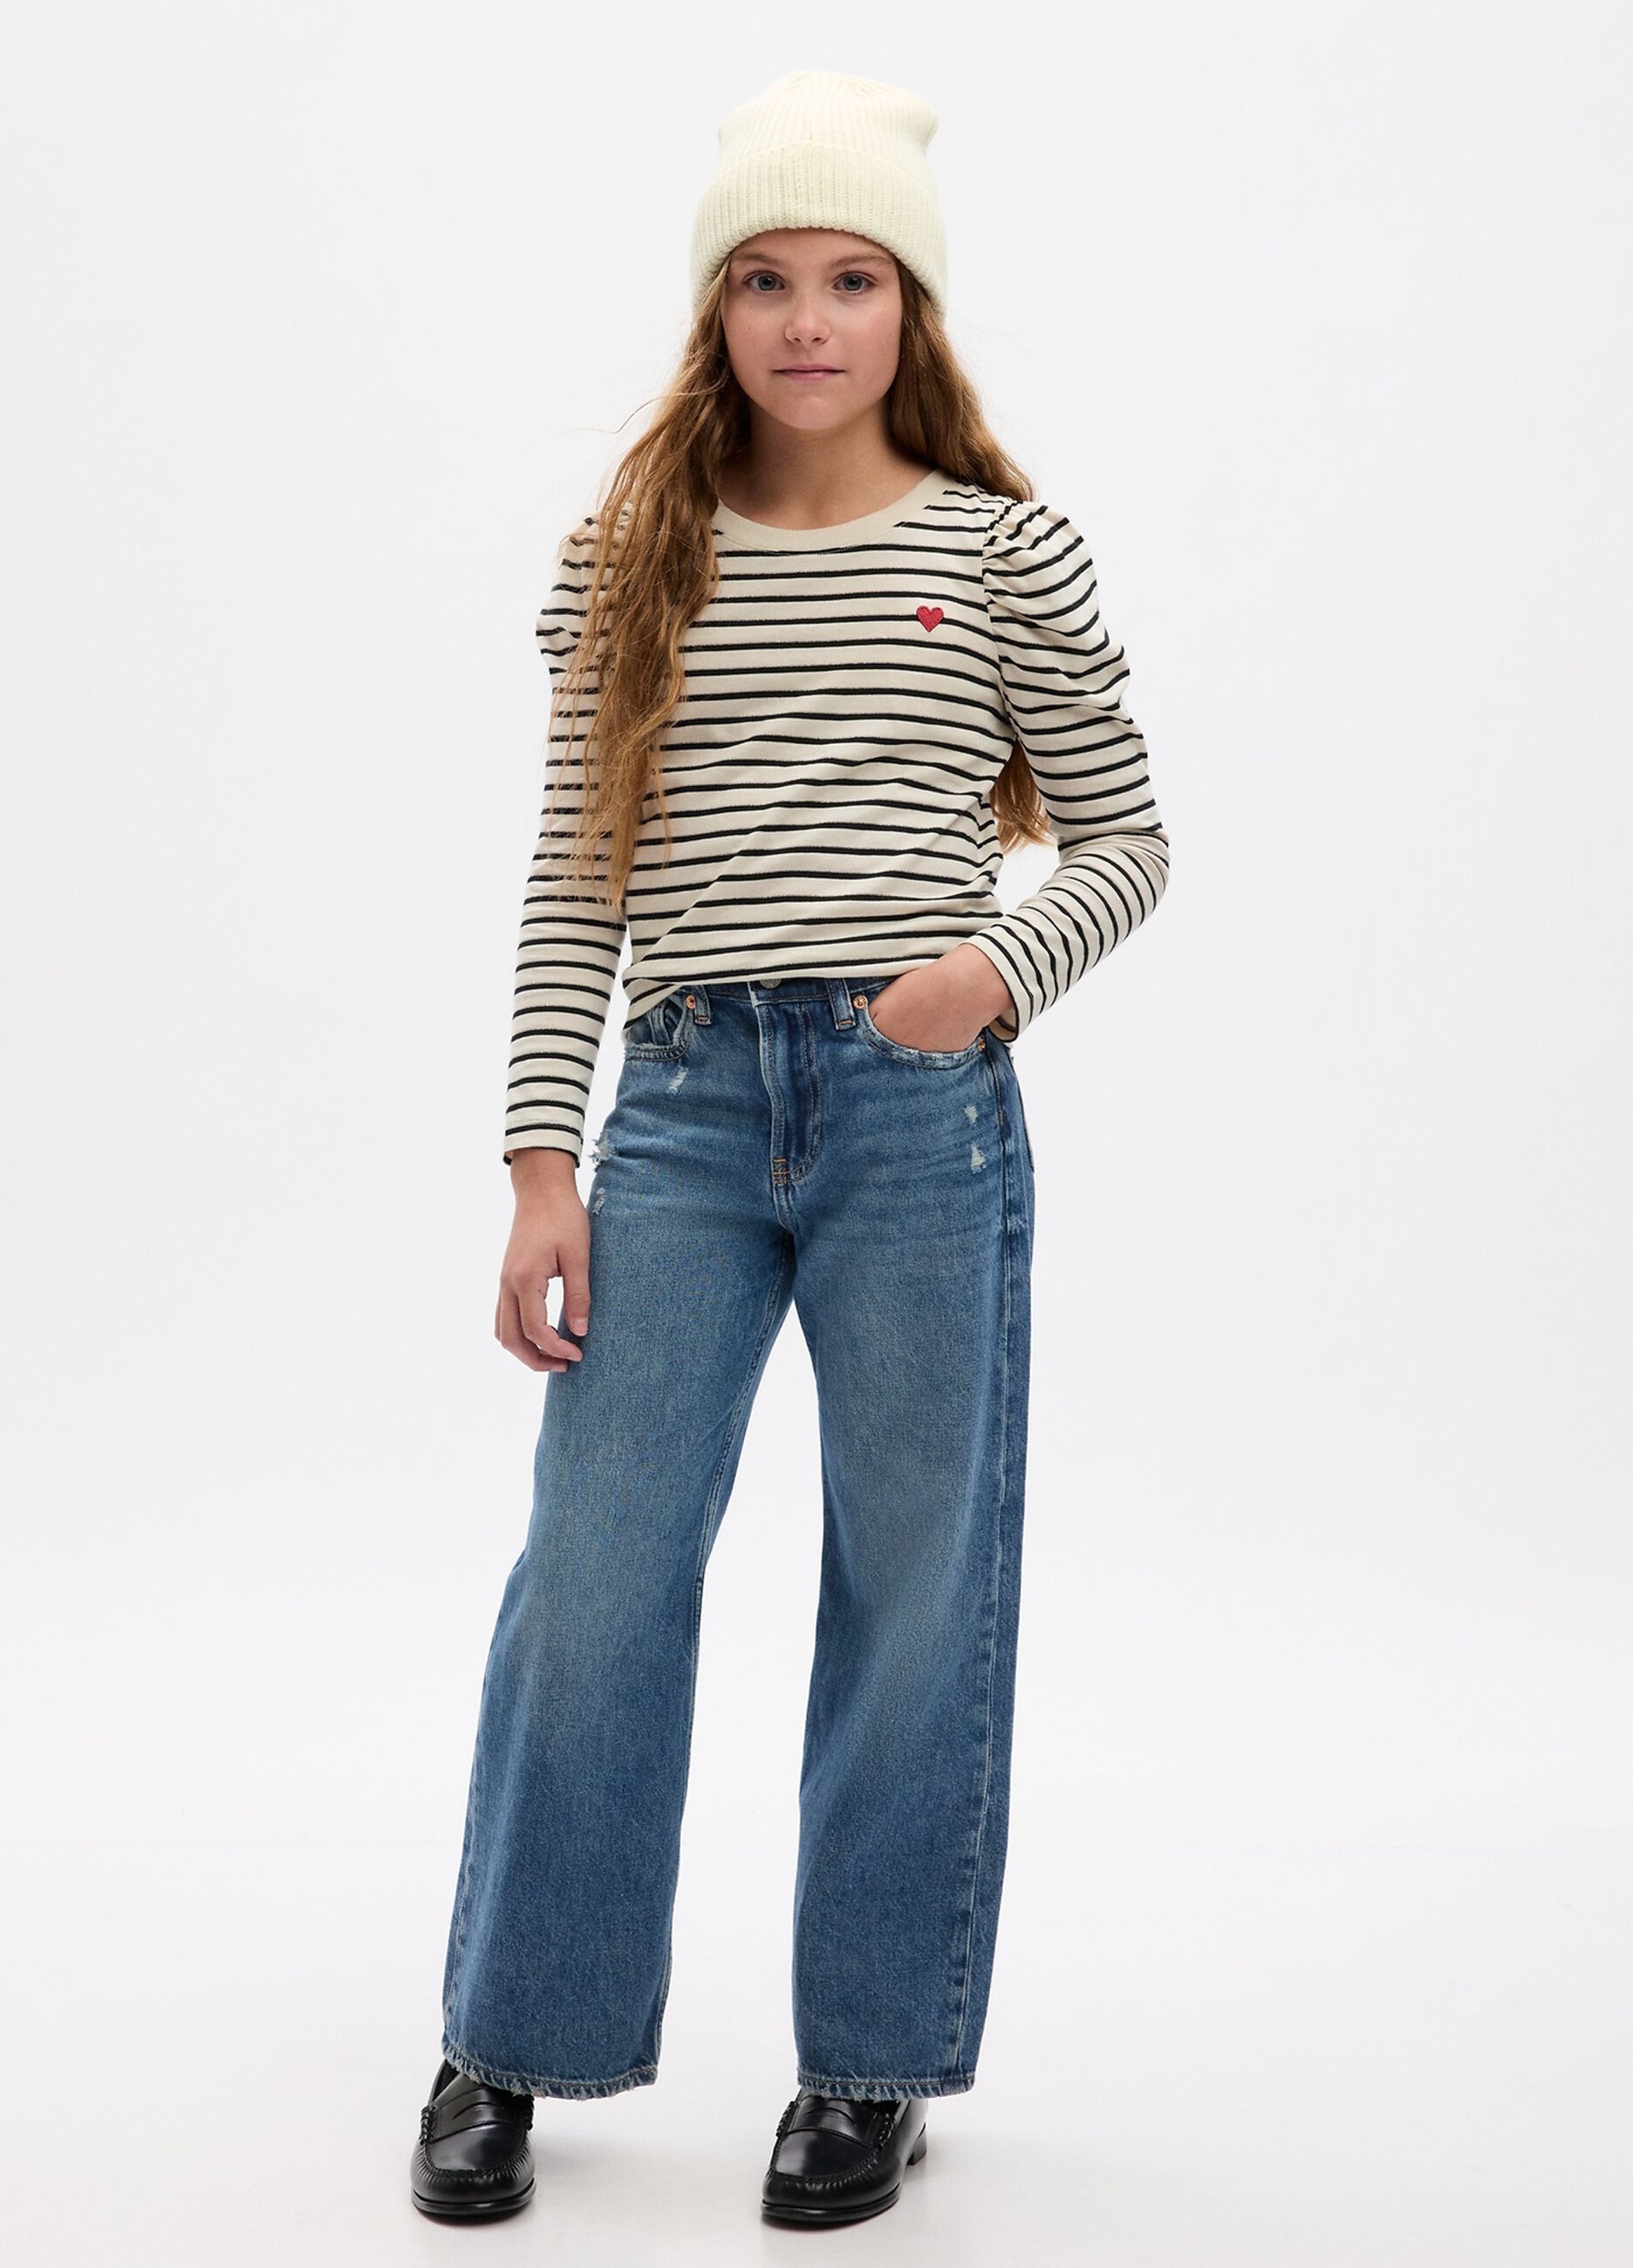 Striped T-shirt with long puff sleeves